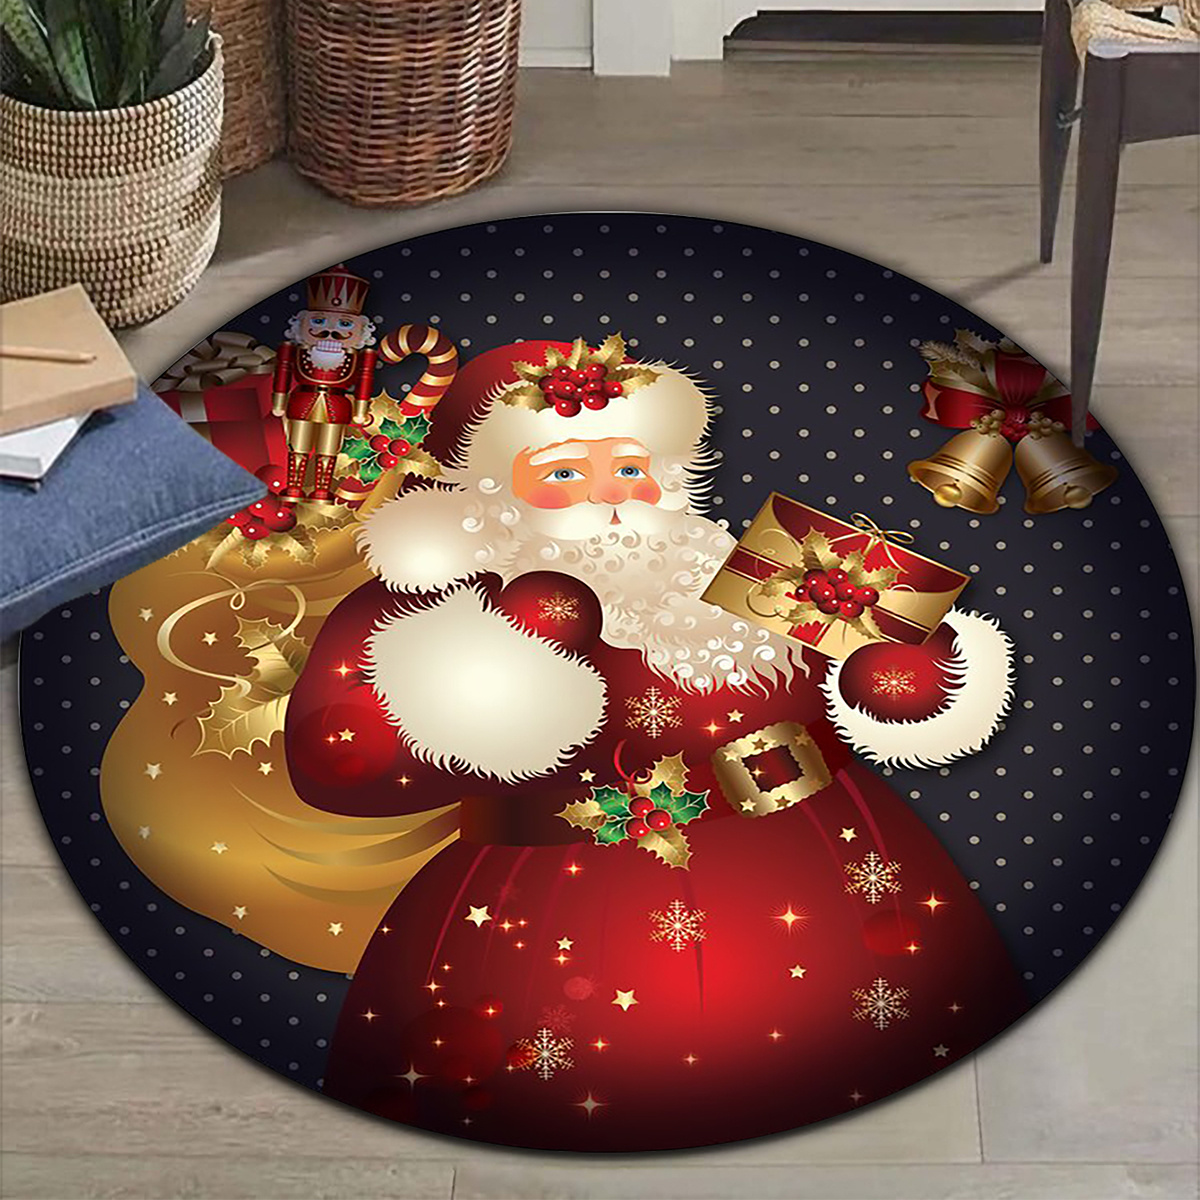 https://img.kwcdn.com/product/round-area-rugs/d69d2f15w98k18-ca4cc1d5/open/2023-09-17/1694956767259-2bae68b12b7b4d7e9d1de2acfbf66ff0-goods.jpeg?imageView2/2/w/500/q/60/format/webp